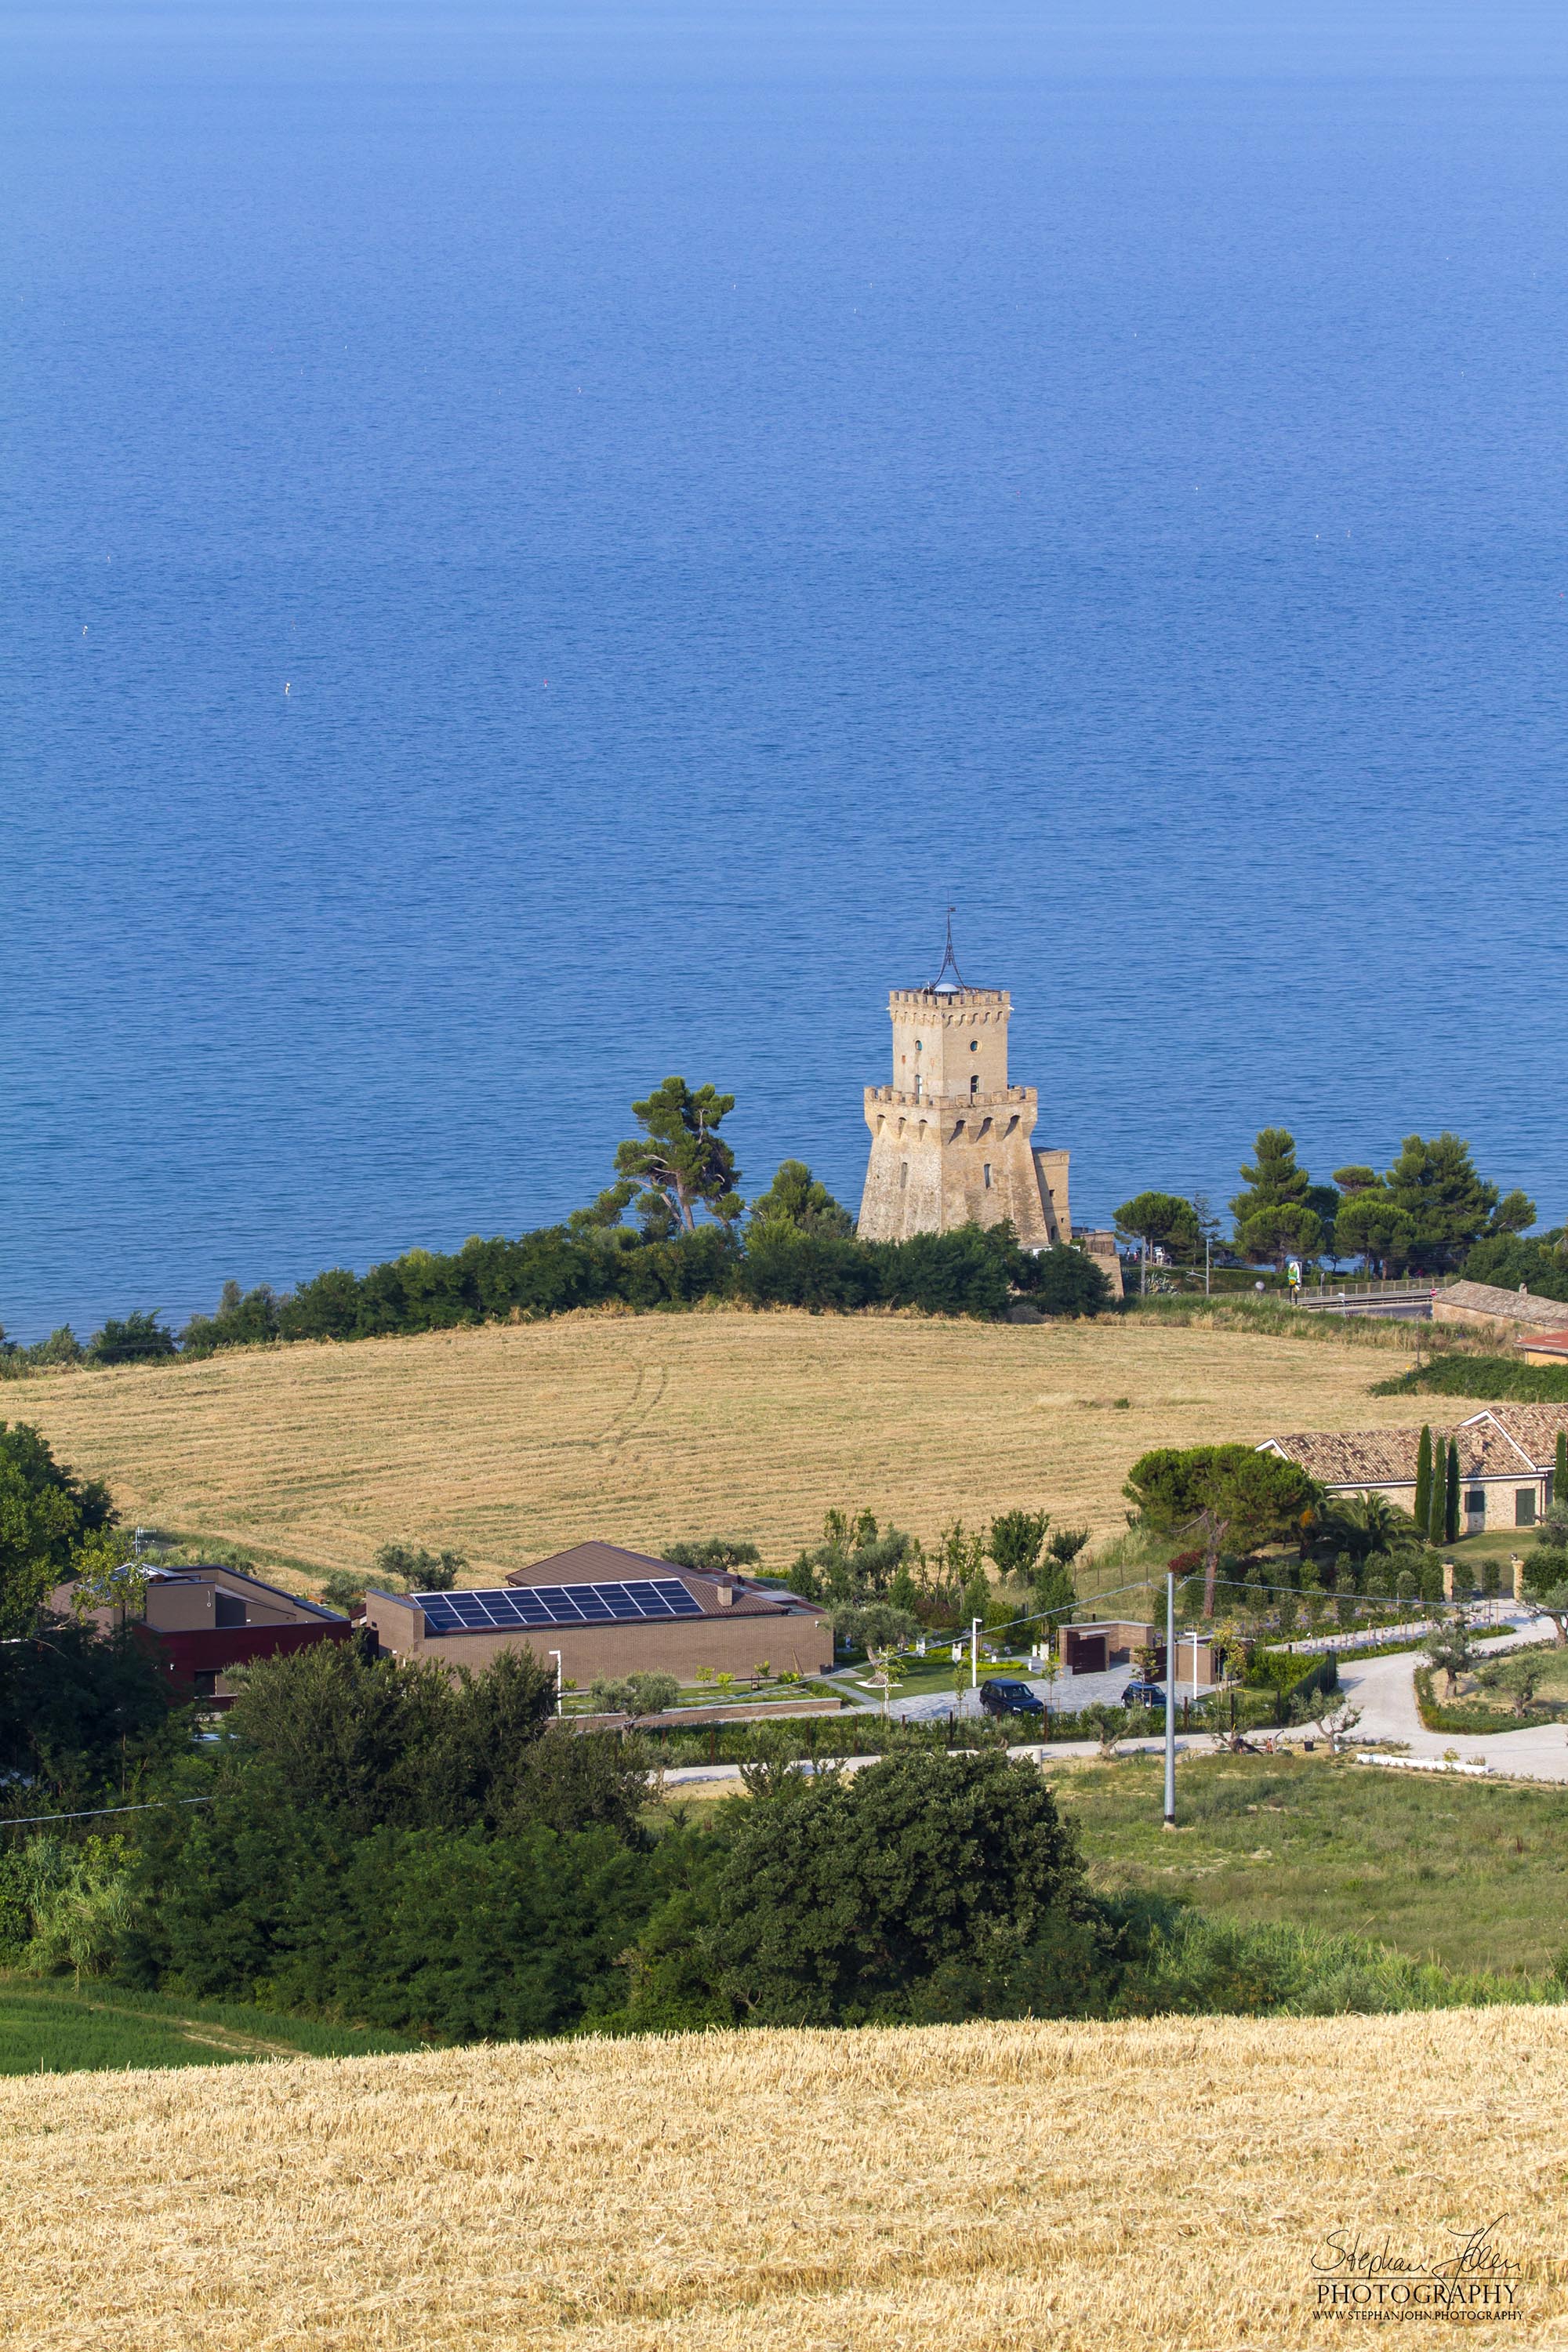 View to the Torre Cerrano on the shores of the Adriatic